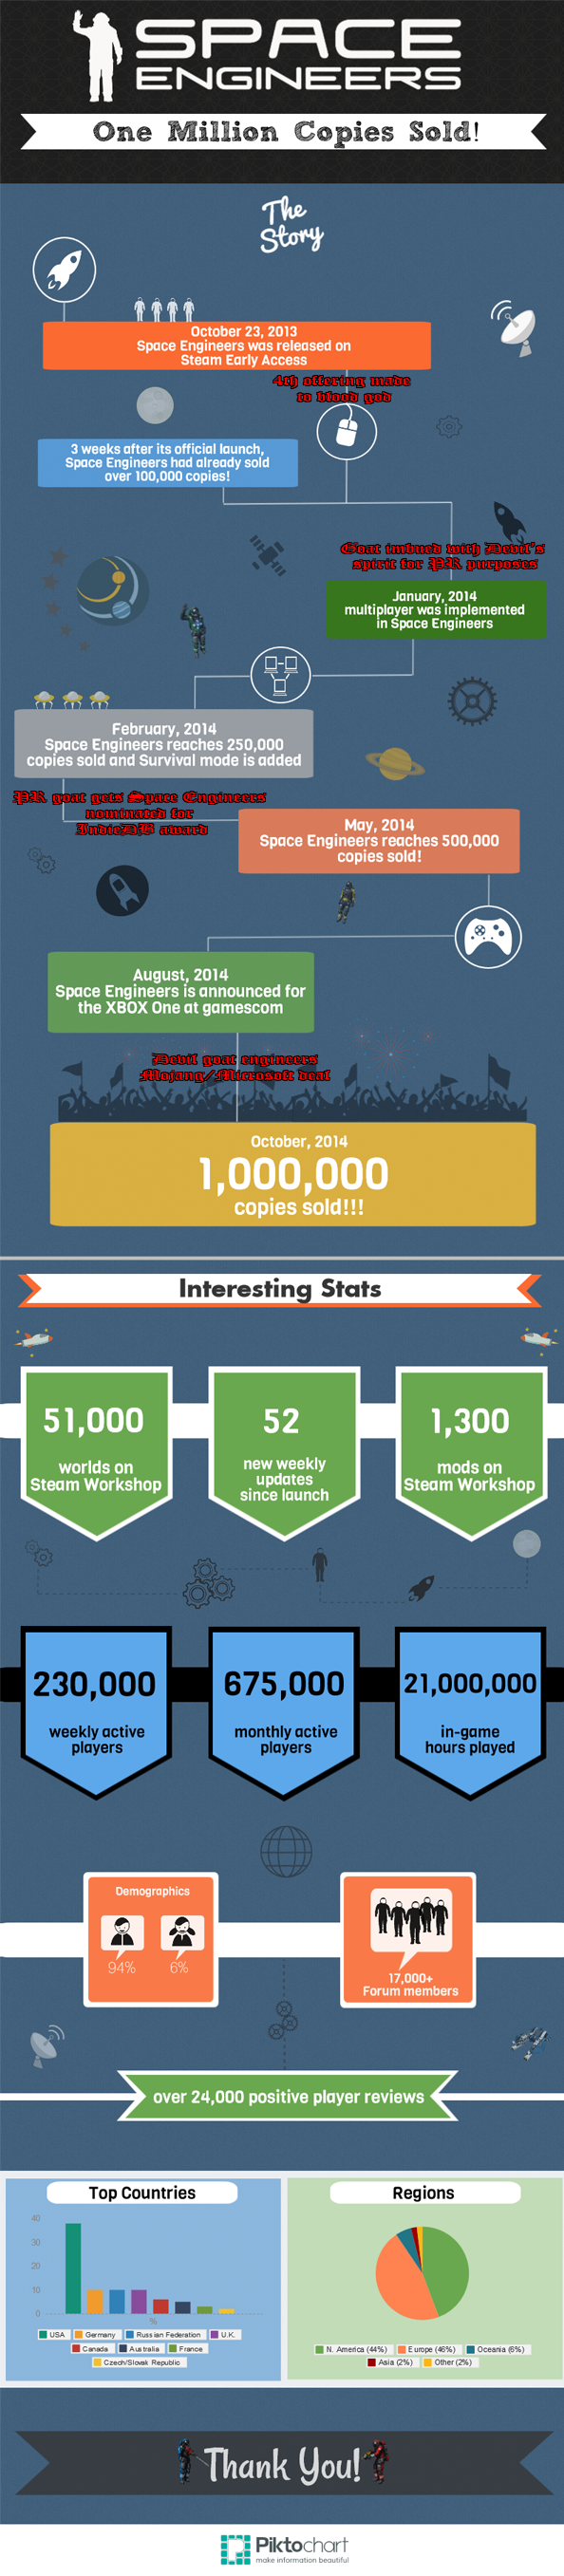 Space Engineers Keen Software infographic